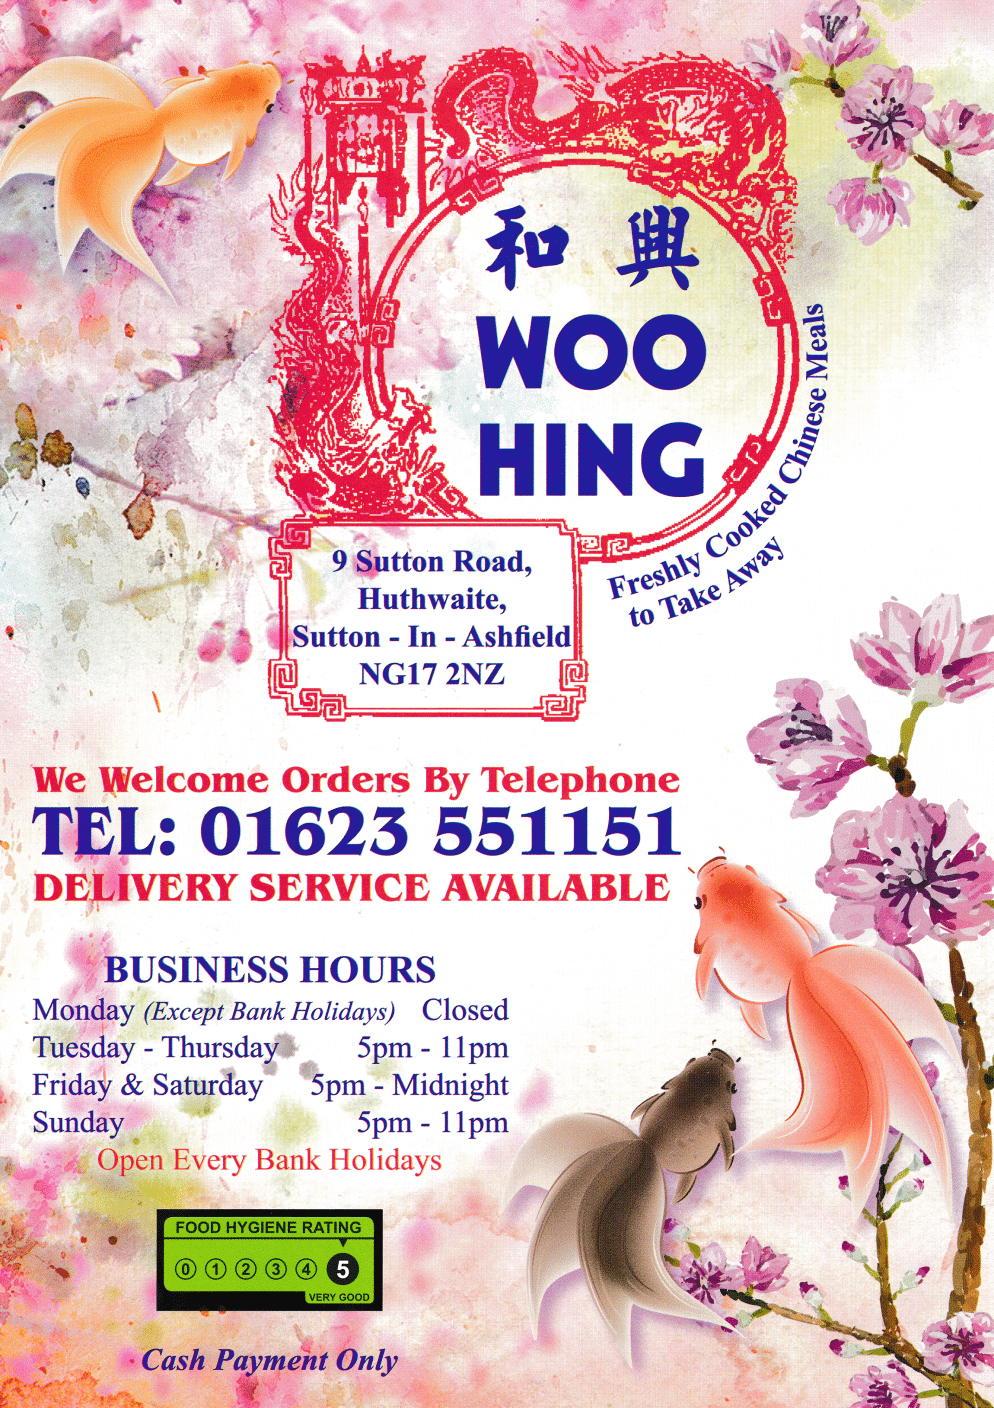 Menu for Woo Hing Chinese takeaway on Sutton Road in Huthwaite, Sutton-In-Ashfield NG17 2NZ